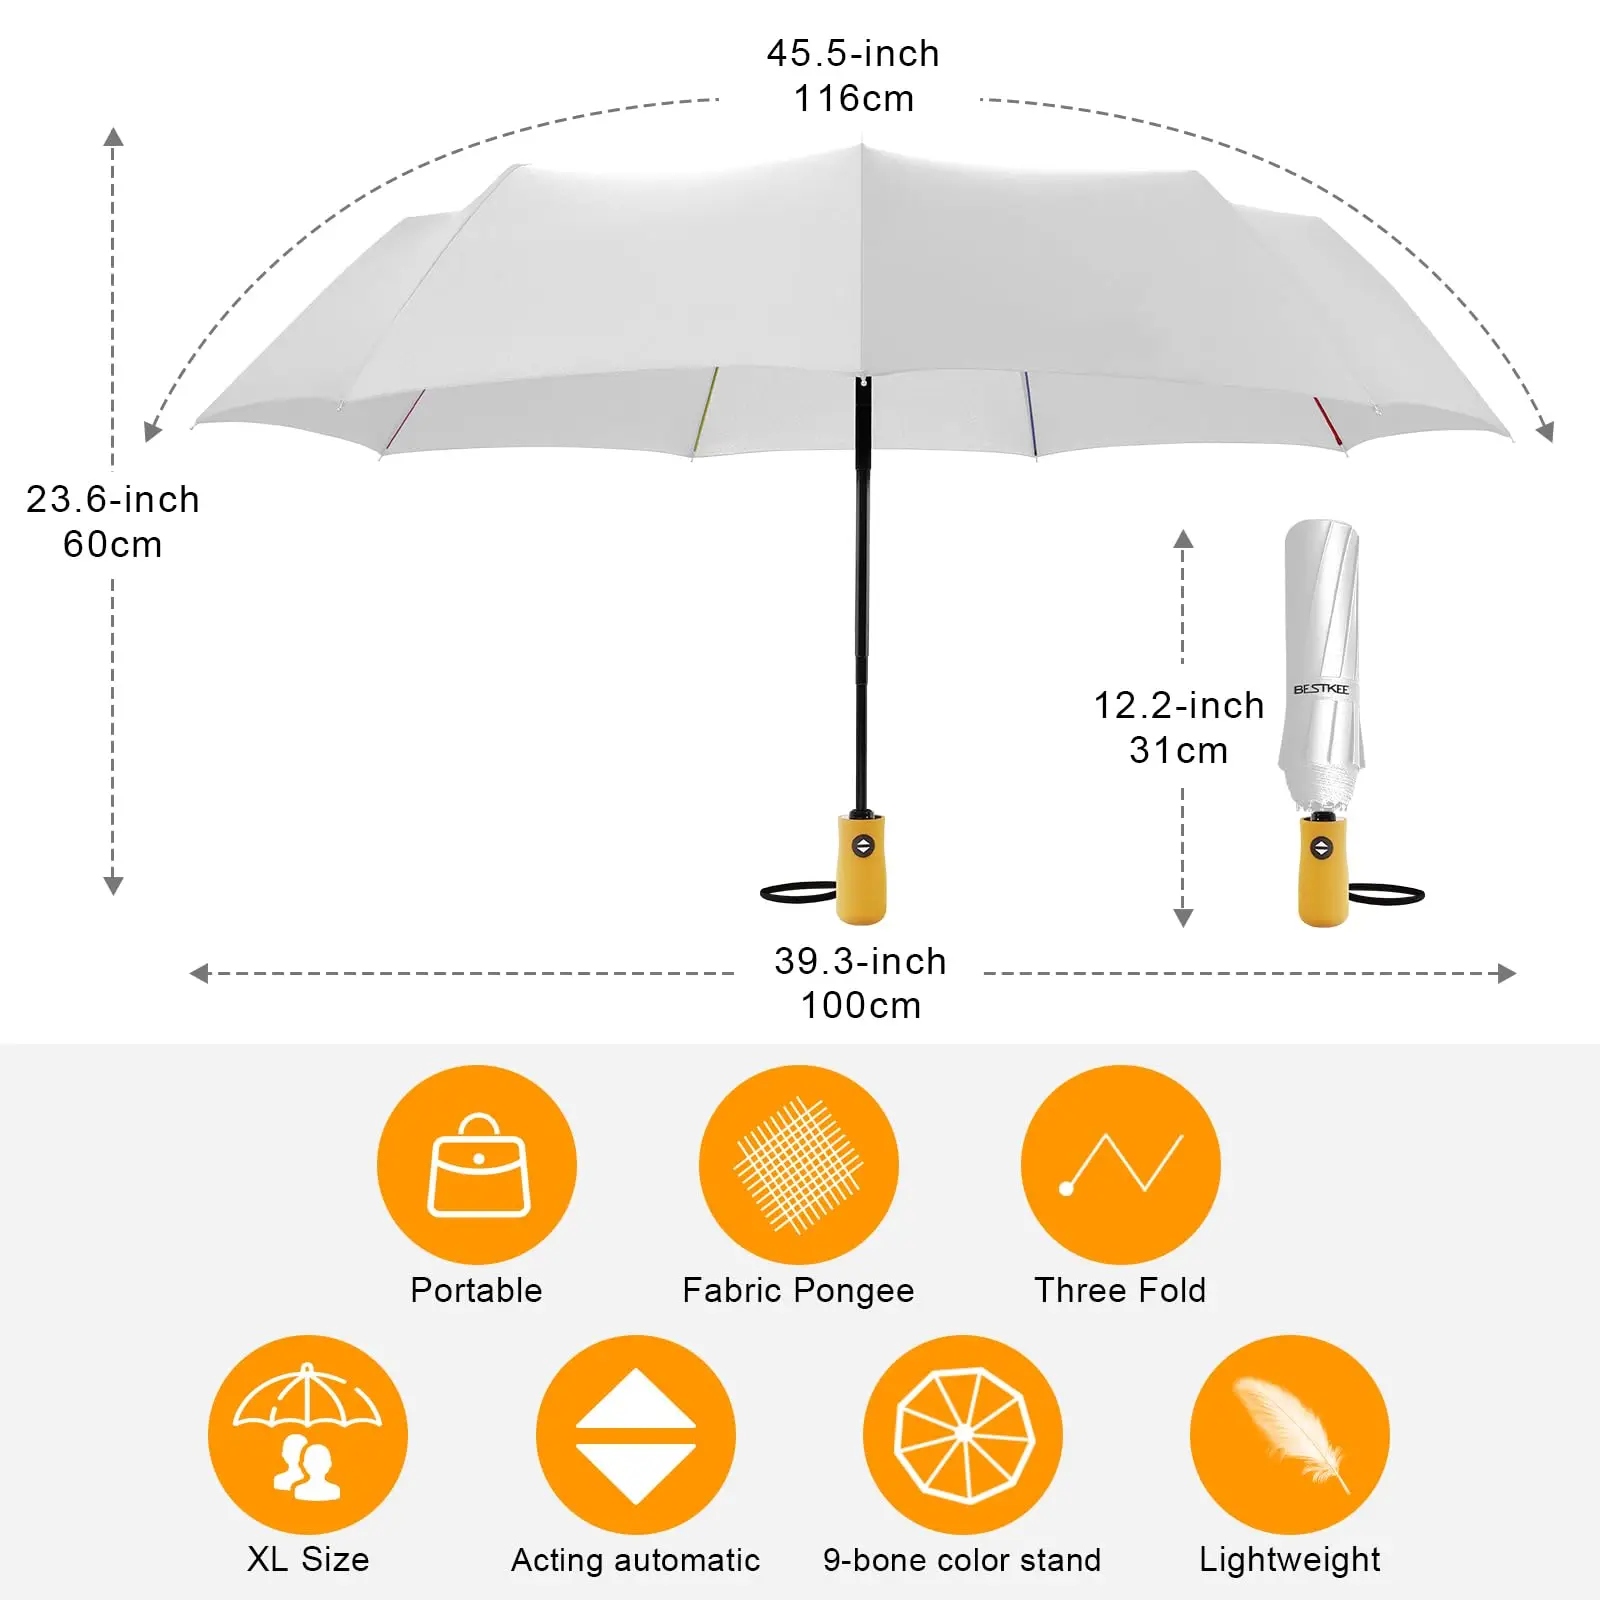 new design custom paraguas Windproof Travel Compact high quality colour bones with automatic fold umbrella with logo prints